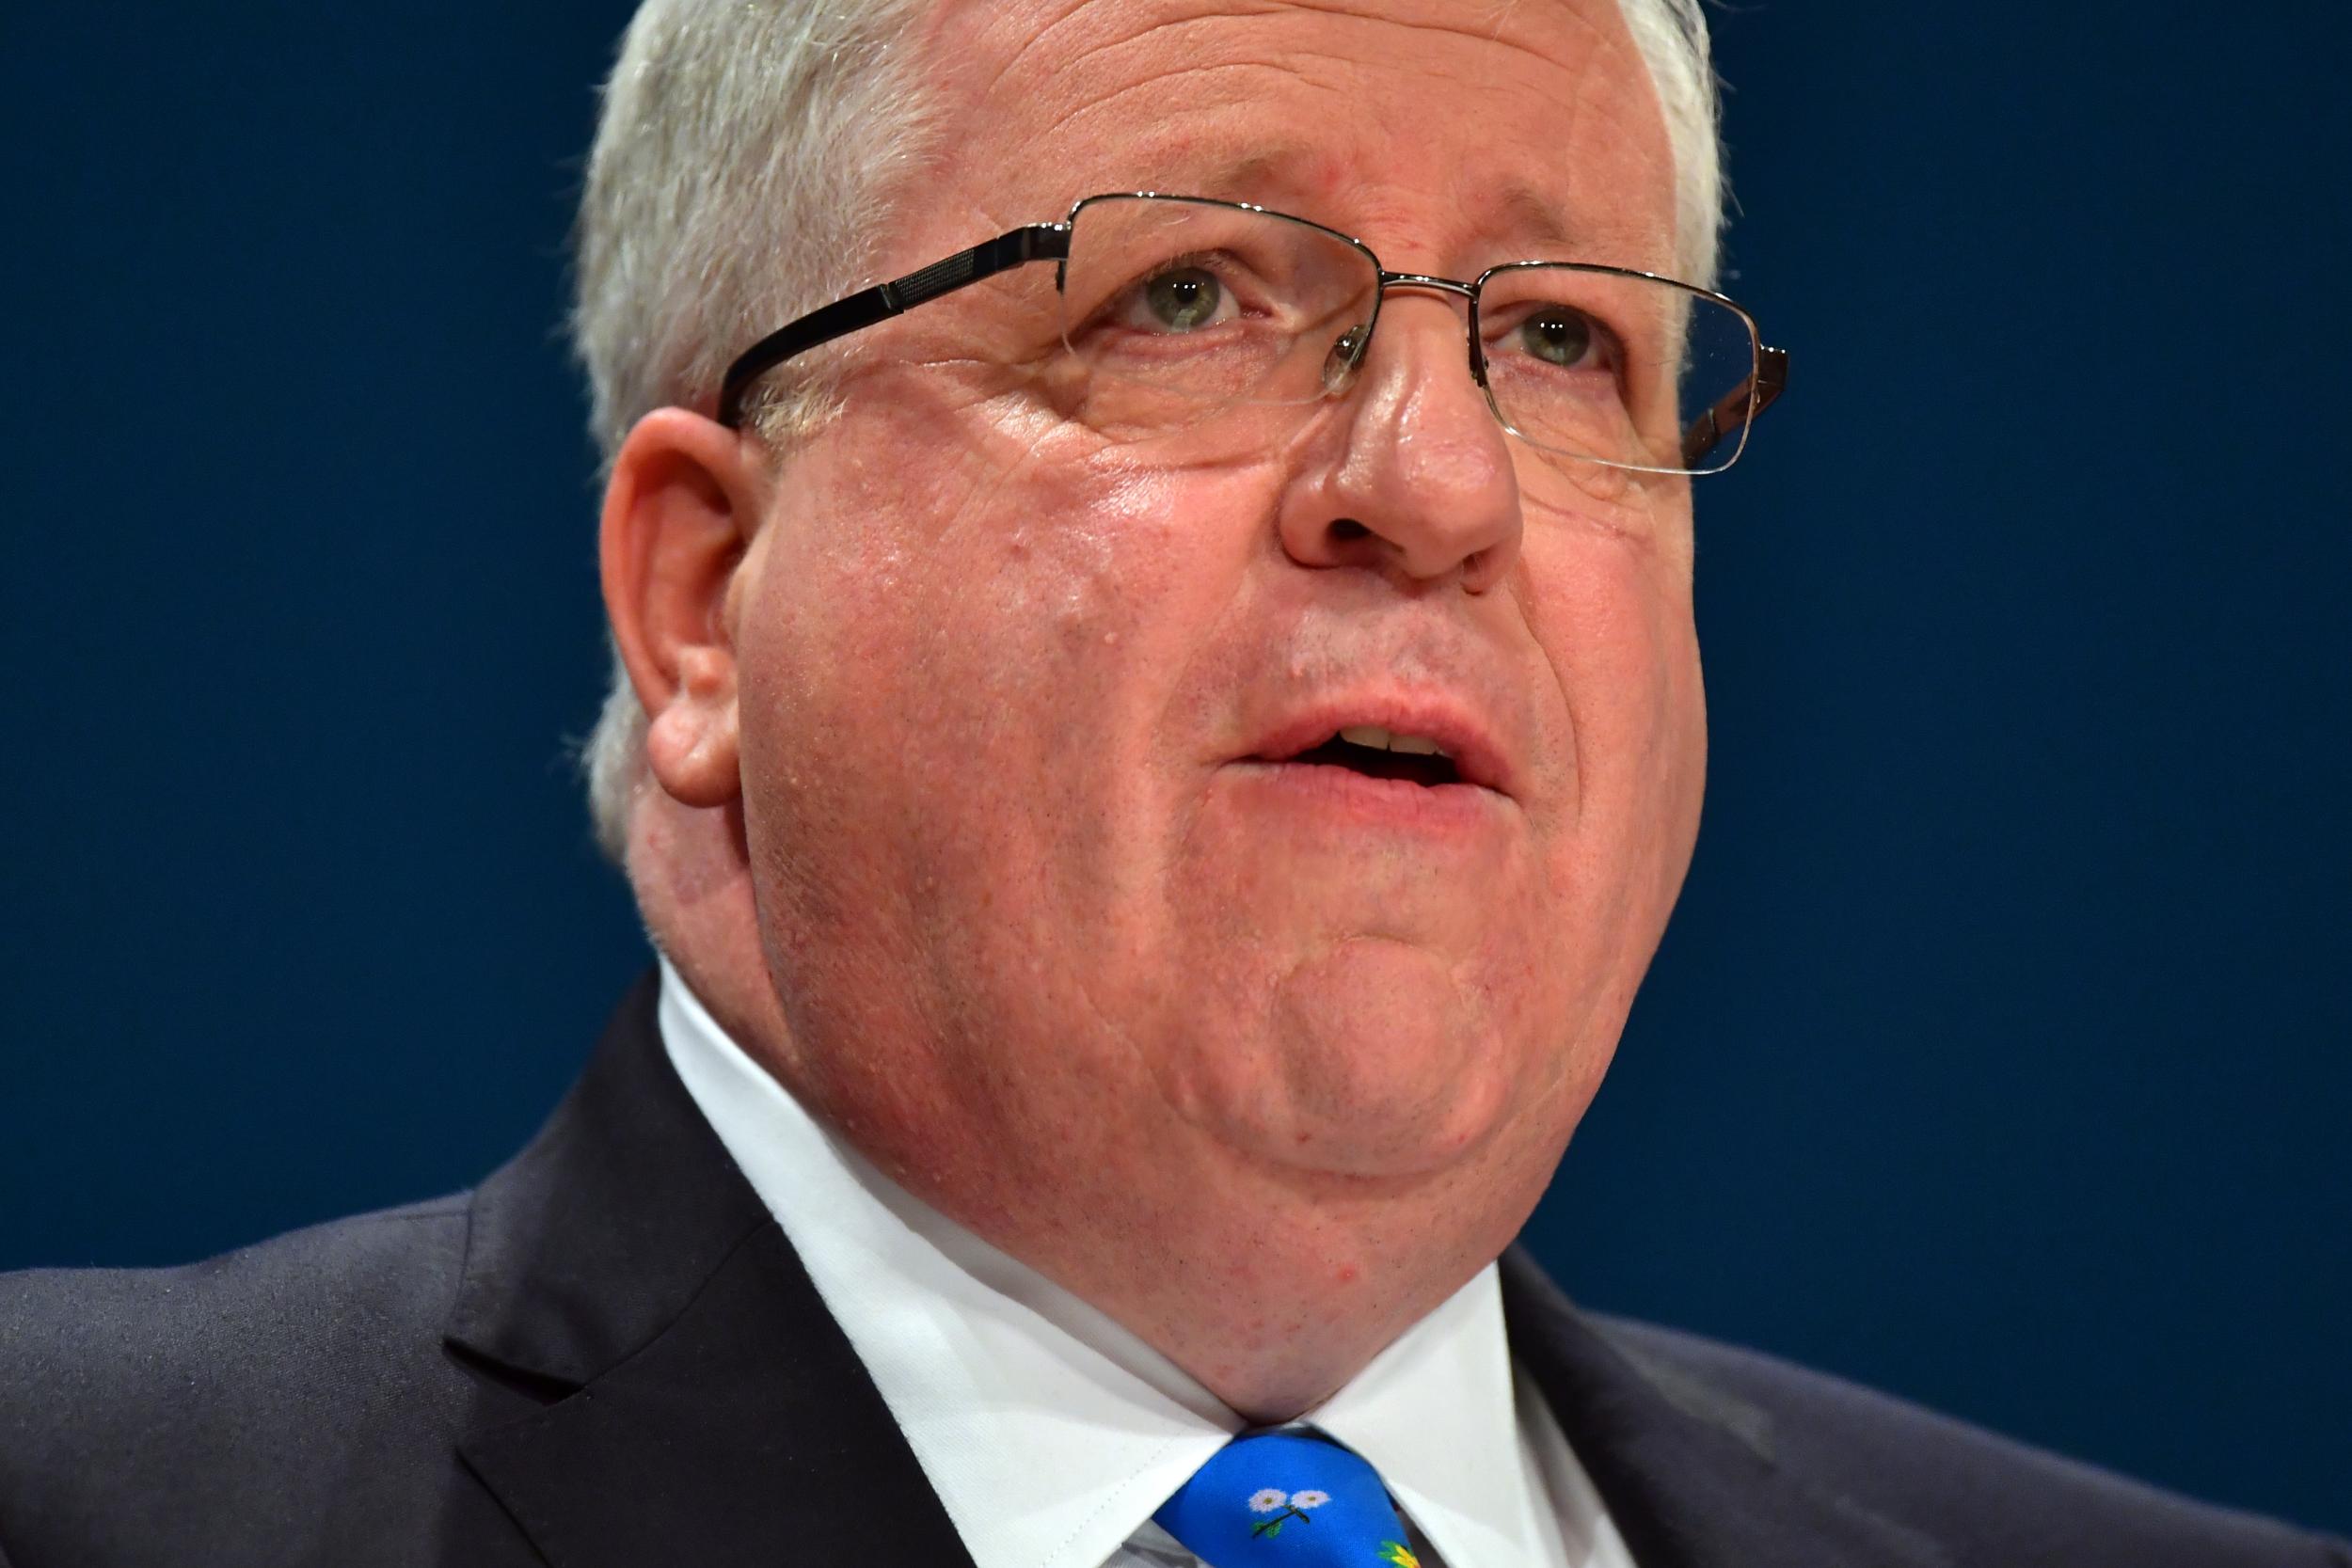 Mr McLoughlin stressed the need to balance the UK budget, which has an annual deficit of £60bn